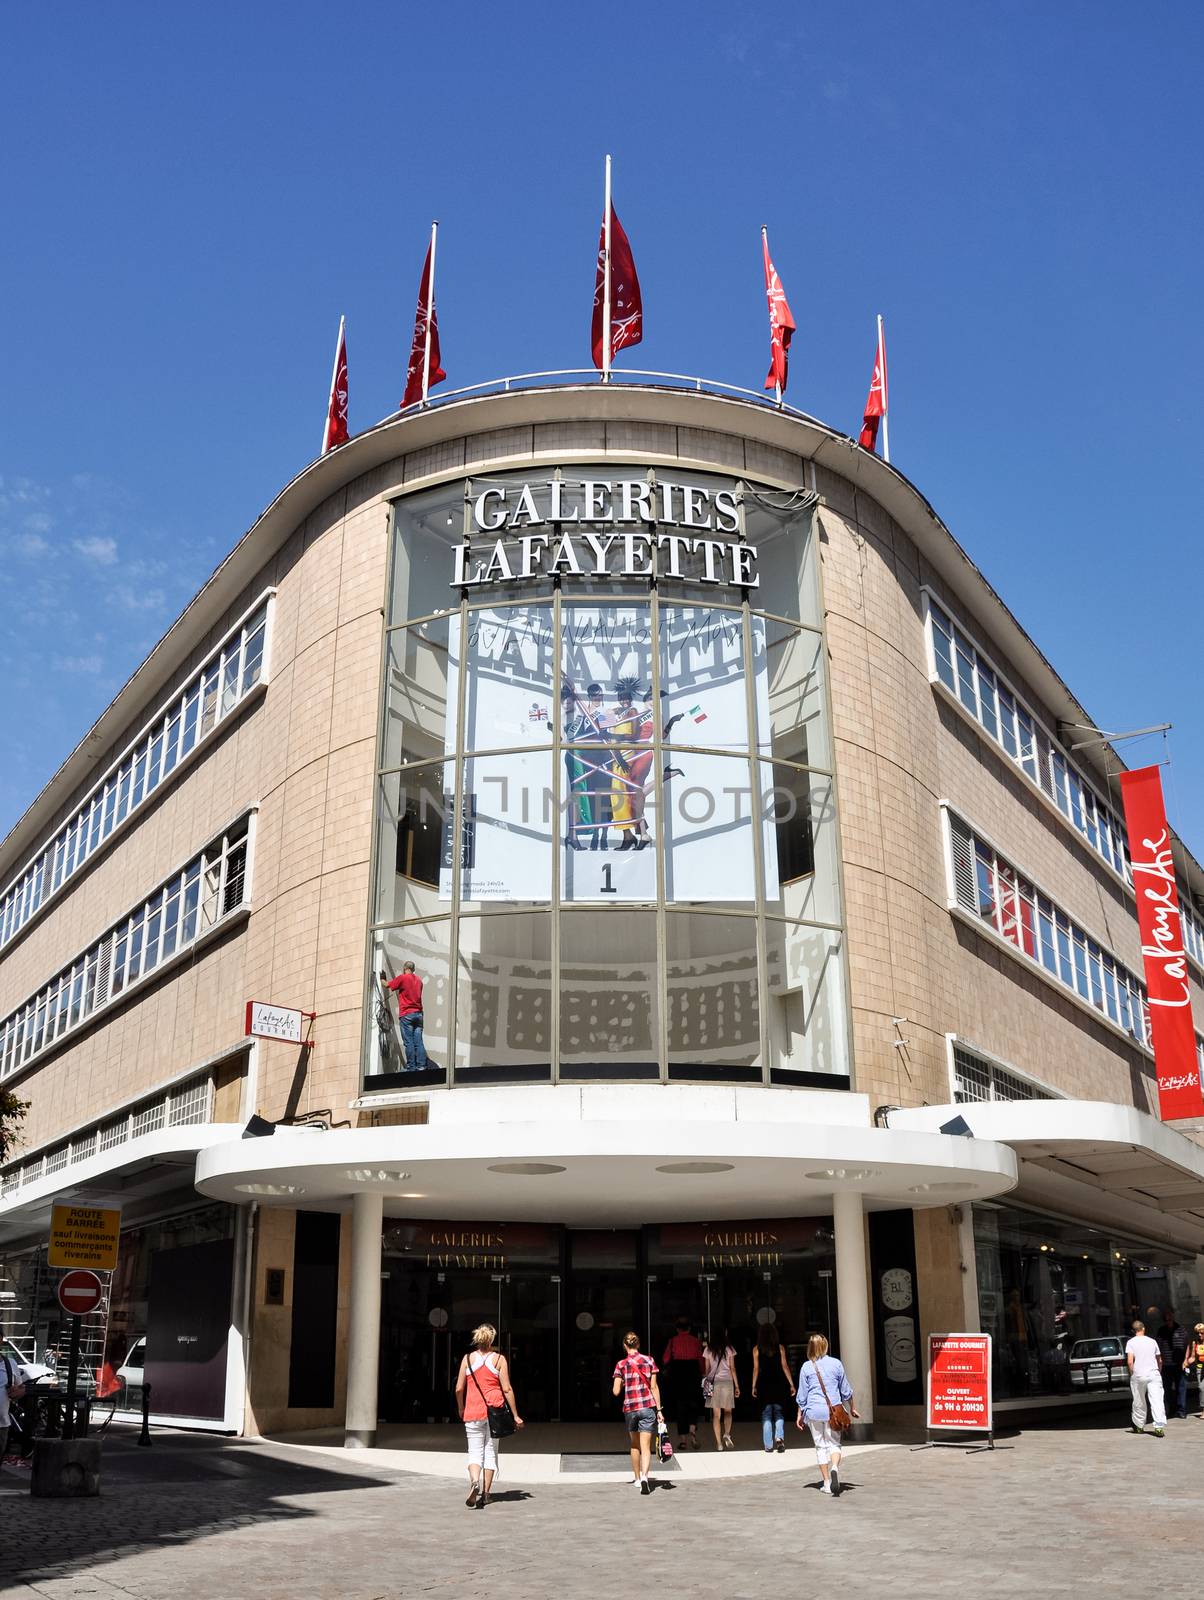 NANTES, FRANCE - CIRCA AUGUST 2011: The Galeries Lafayette department store in the city centre.